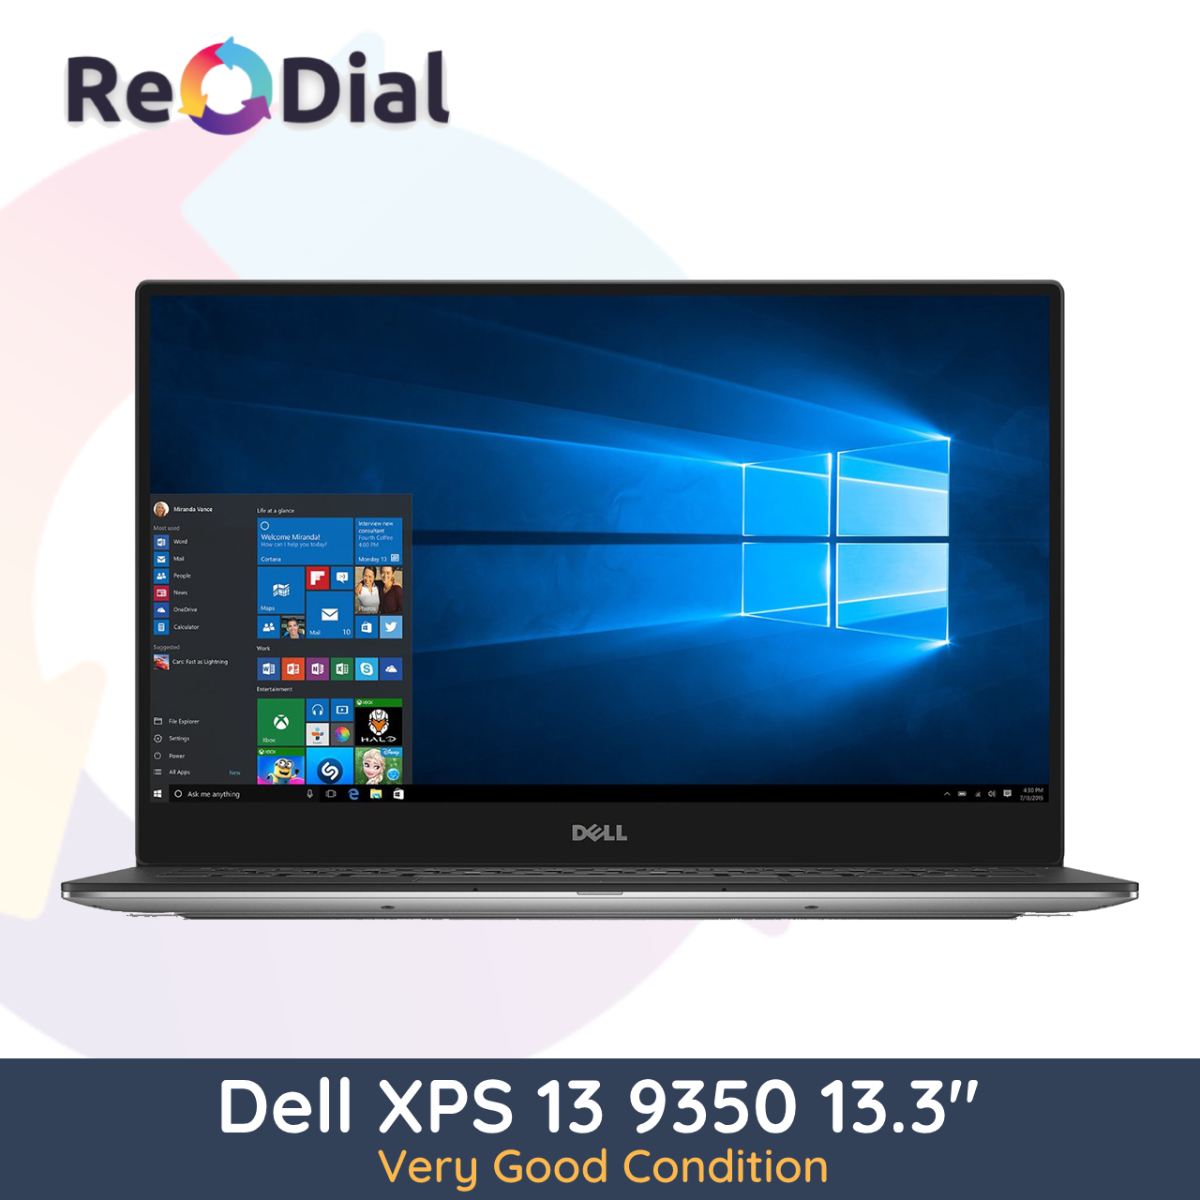 Dell XPS 13 9350 13.3" Laptop i7-6560U 256GB 8GB RAM - Very Good Condition